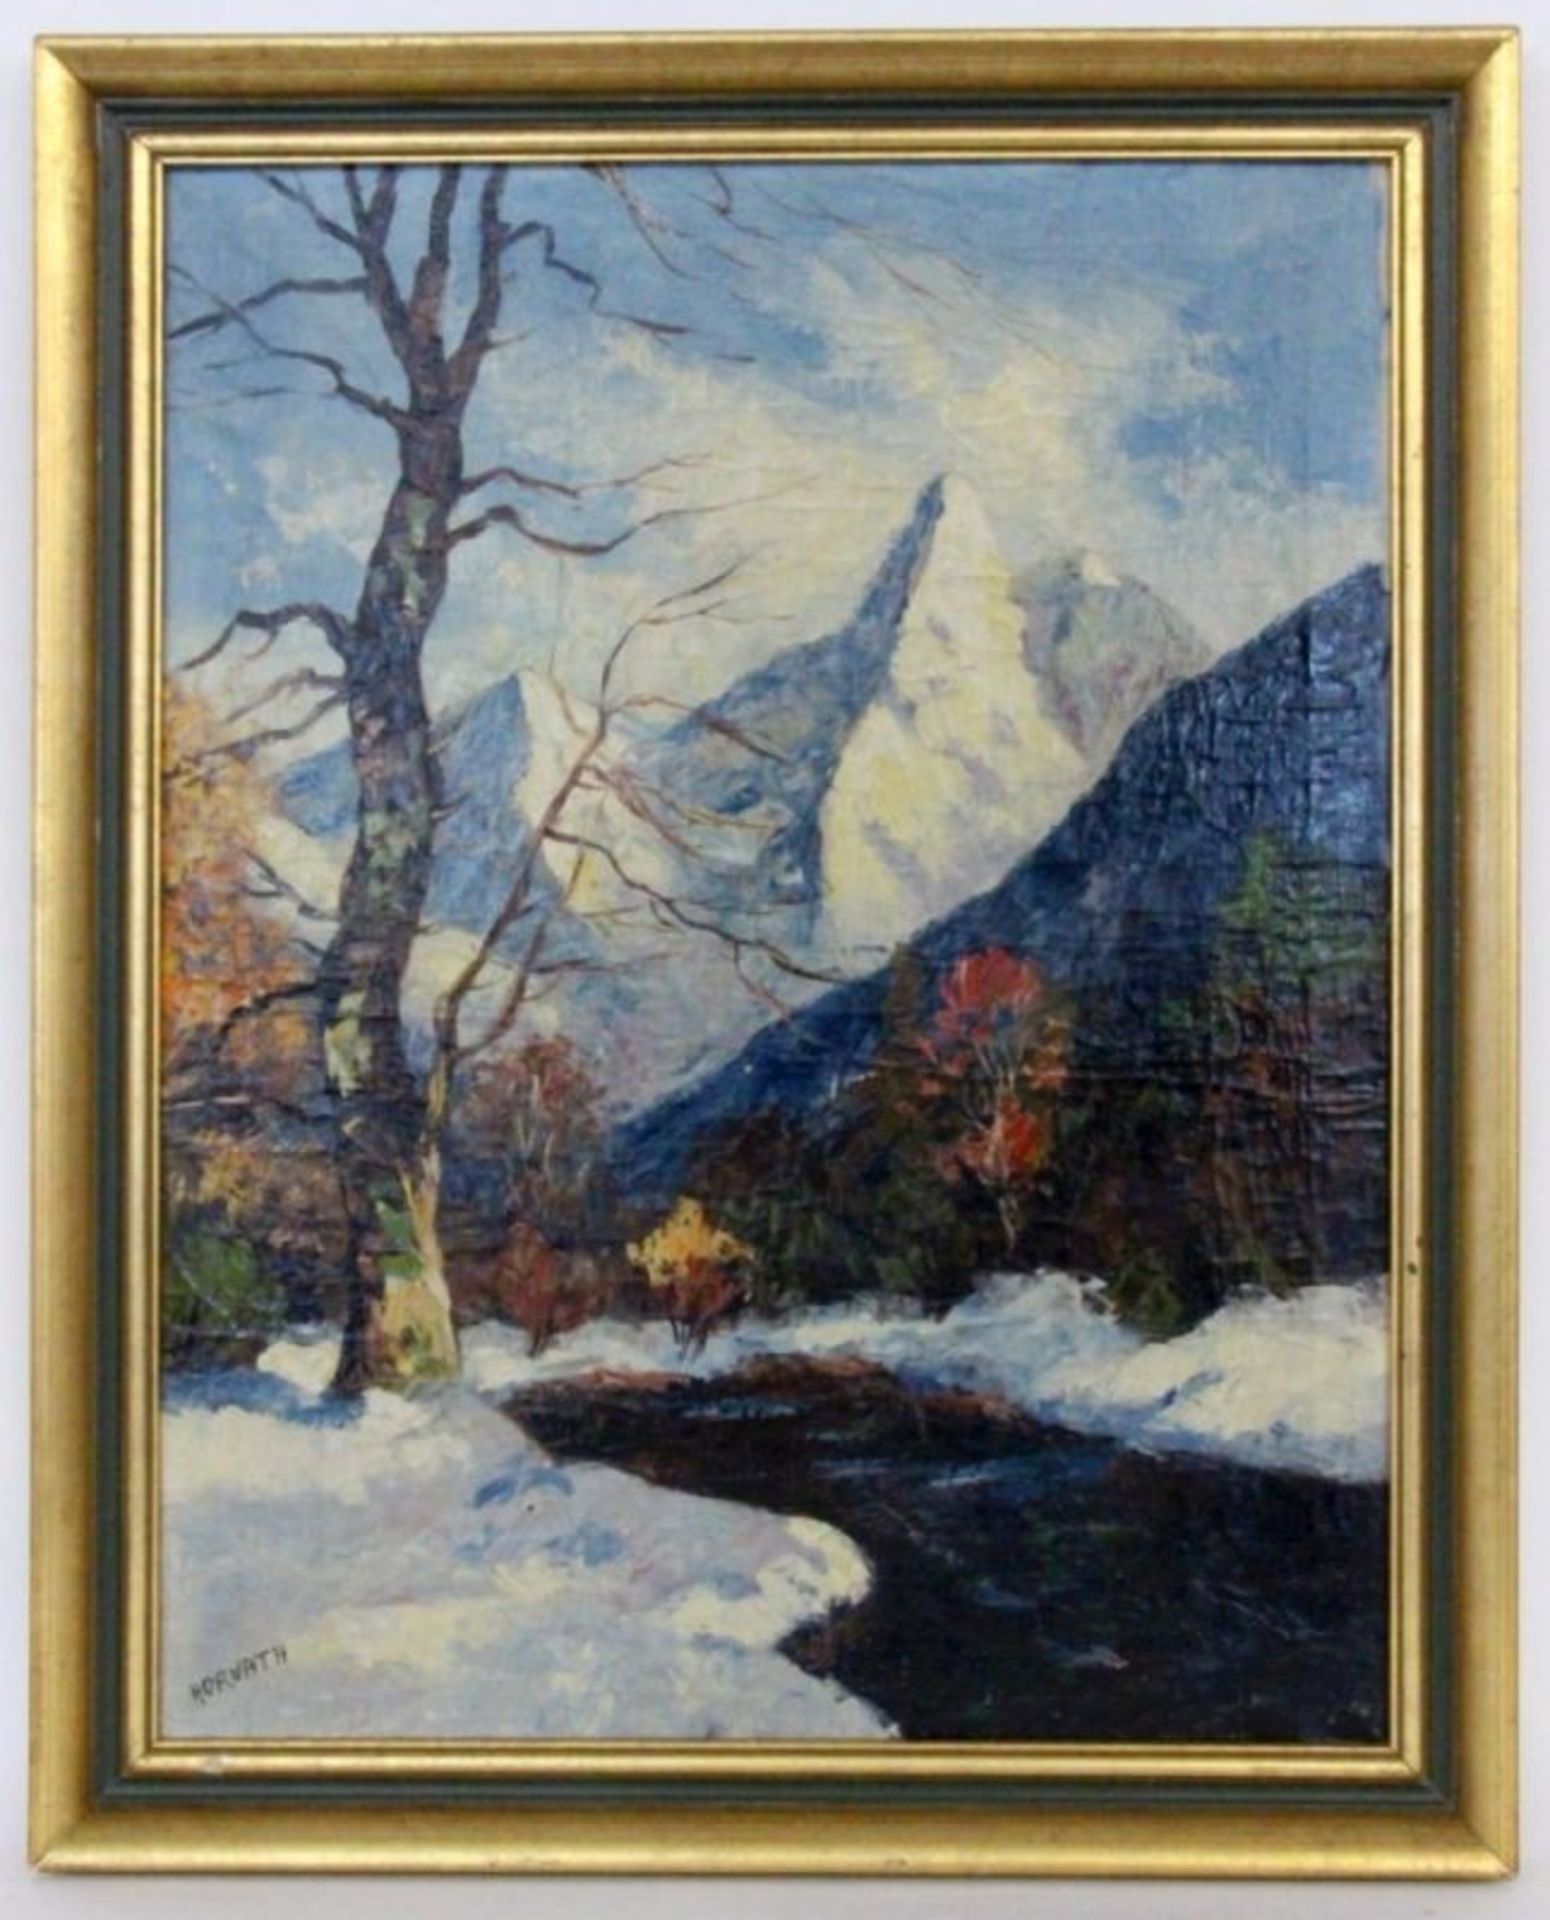 HORVATH Hungarian painter, 20th century High Mountain Landscape. Oil on canvas, signed. 50